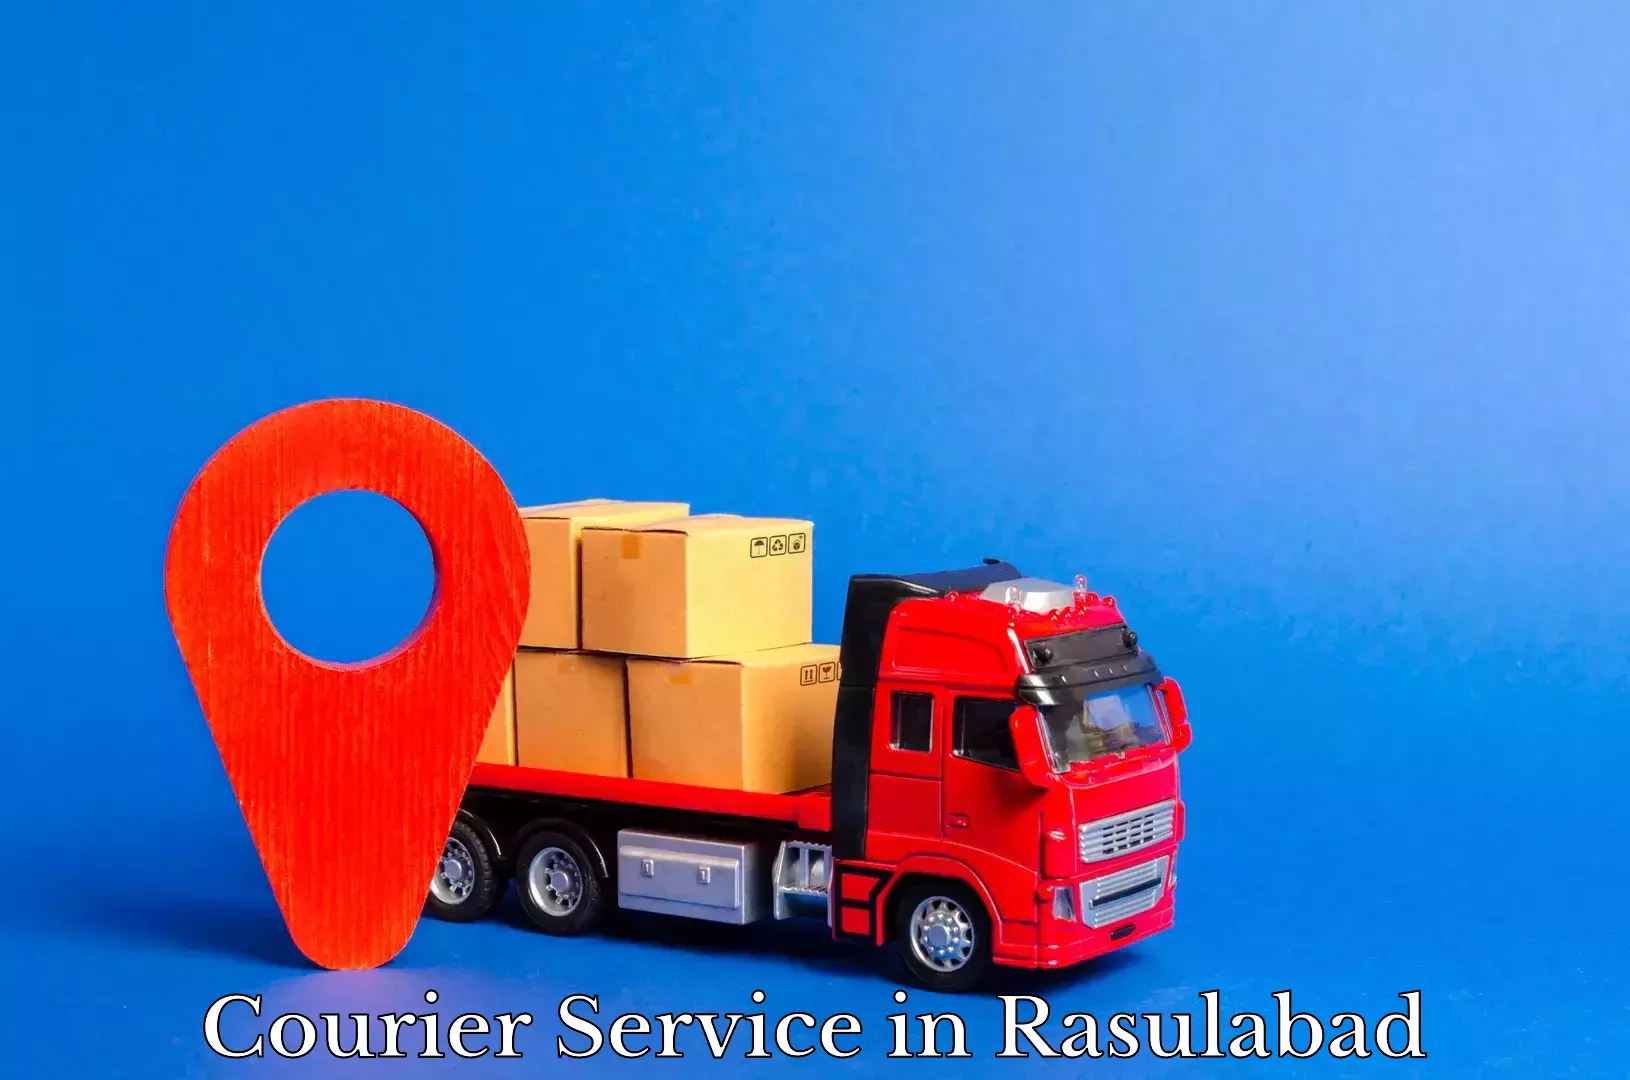 Parcel service for businesses in Rasulabad